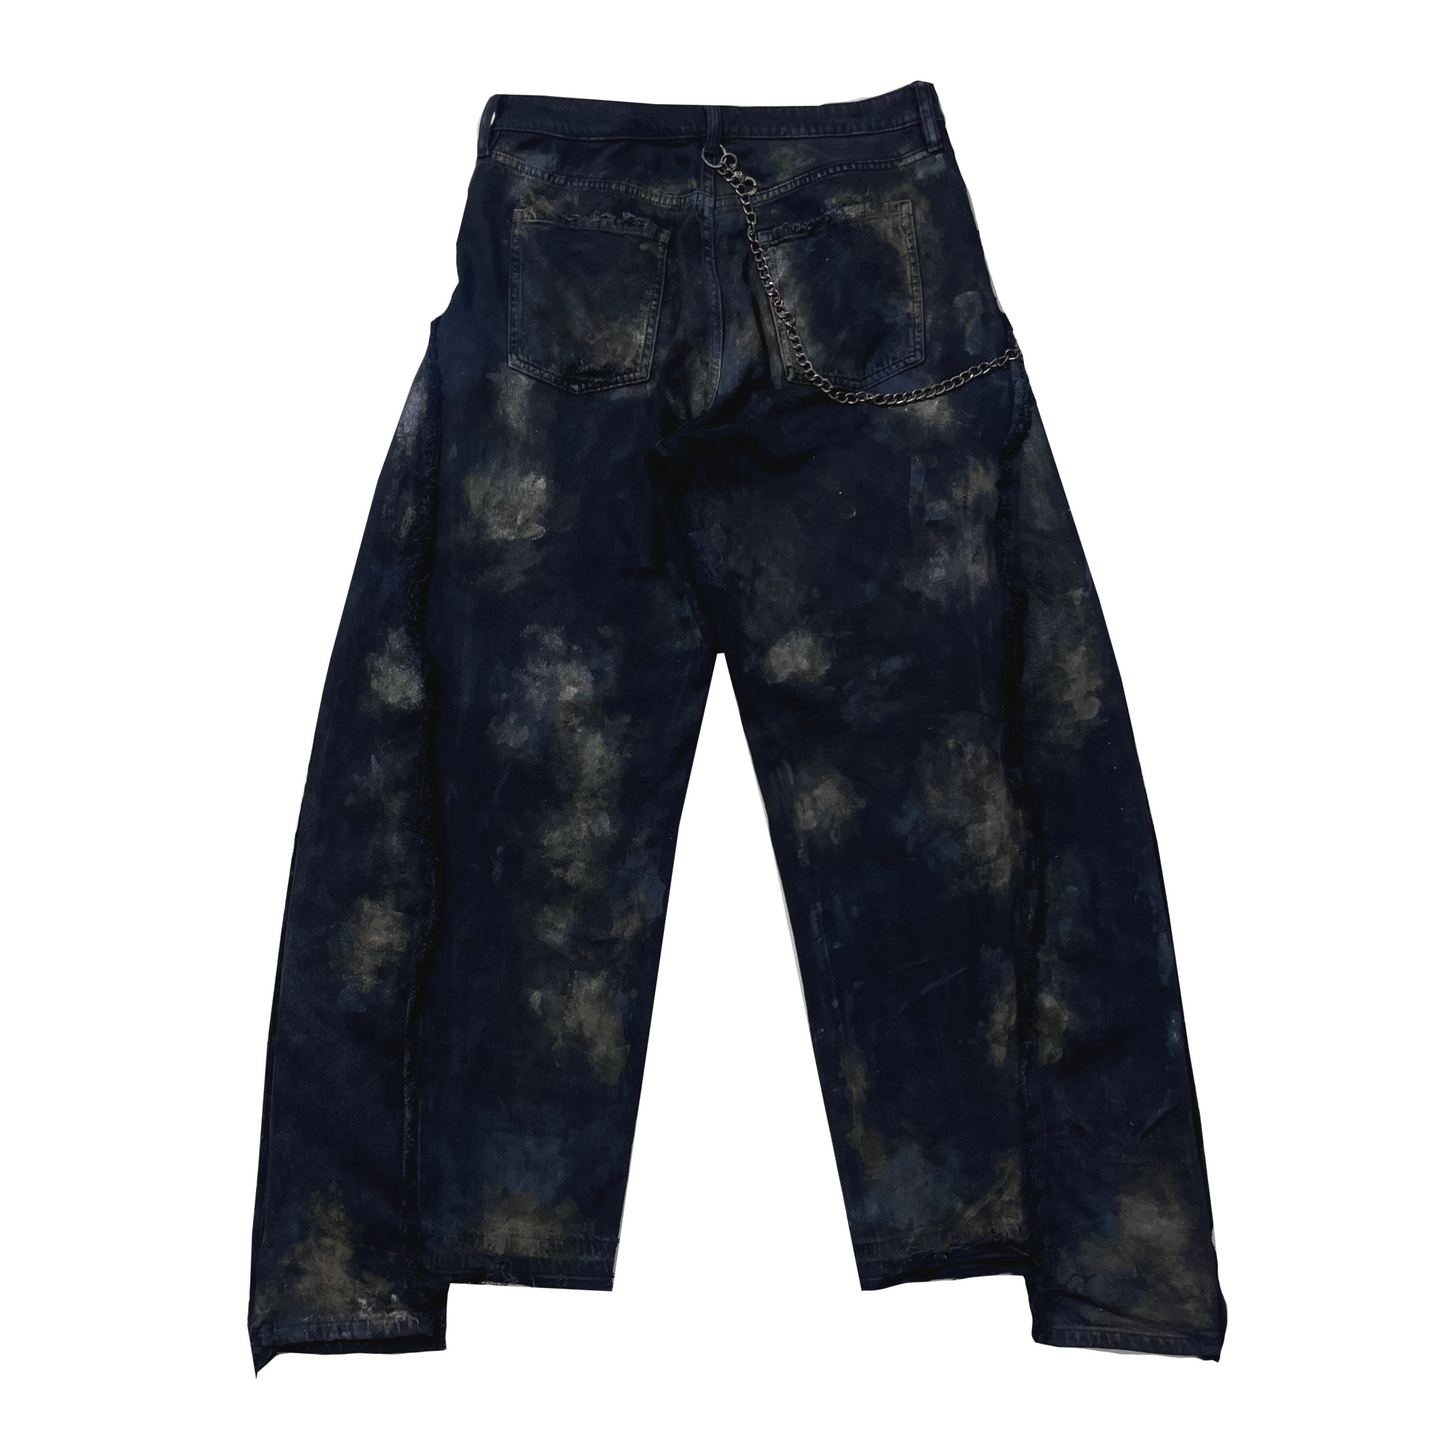 Super distressed Reconstructed Baggy Jeans